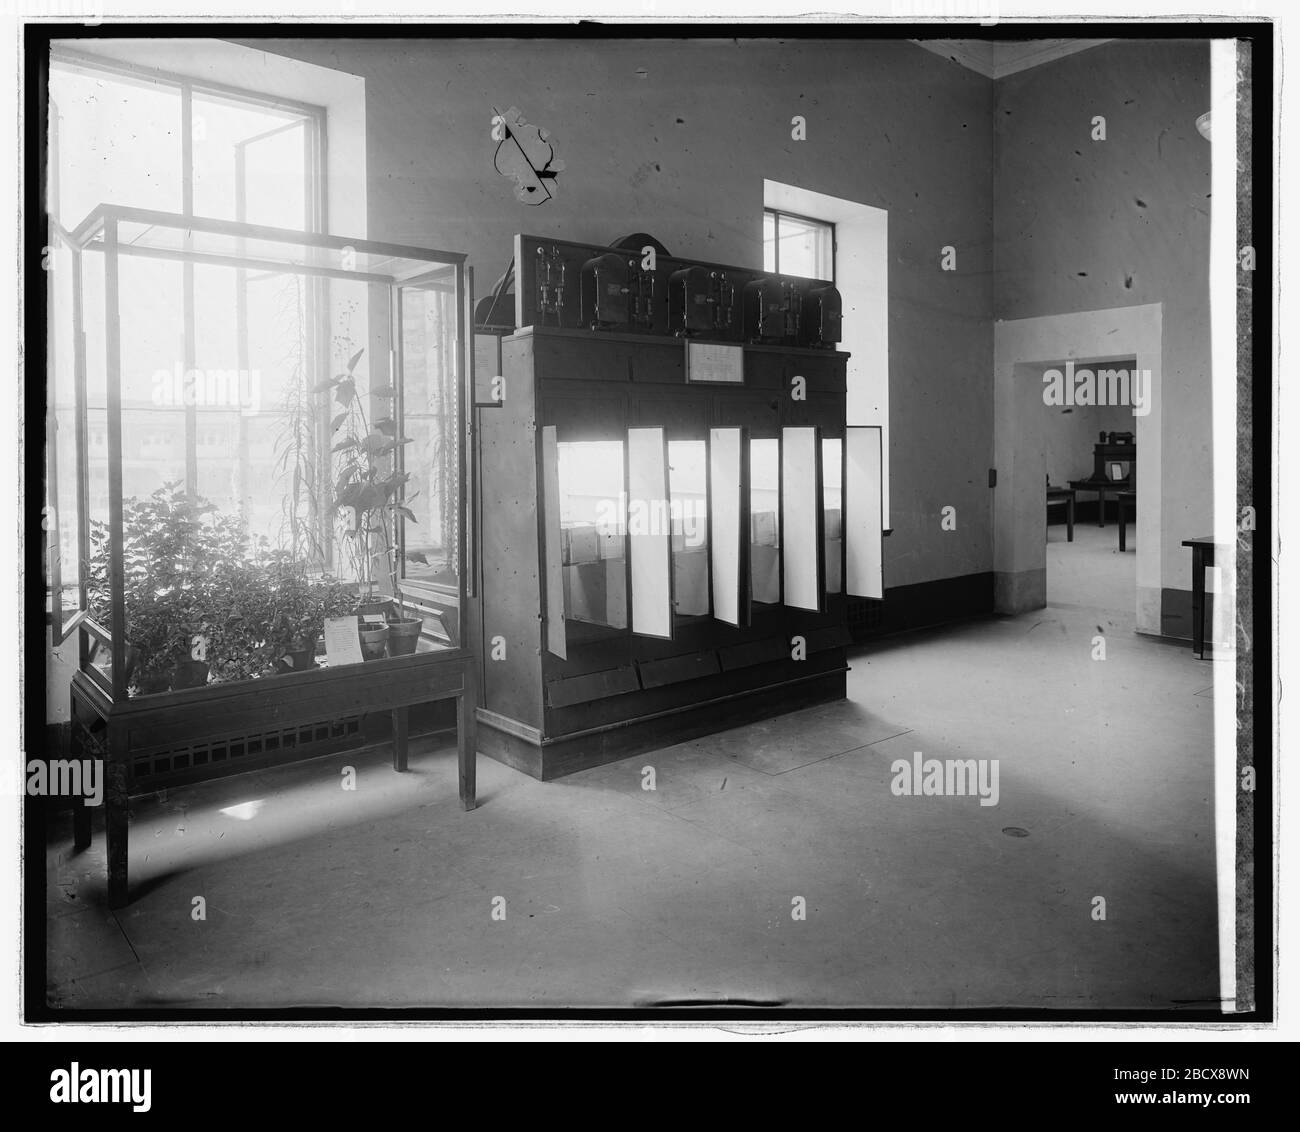 'English: Title: Academy of Sciences, plant control Abstract/medium: 1 negative : glass ; 8 x 10 in. or smaller; between 1910 and 1935 date QS:P,+1950-00-00T00:00:00Z/7,P1319,+1910-00-00T00:00:00Z/9,P1326,+1935-00-00T00:00:00Z/9; Library of Congress Catalog: http://lccn.loc.gov/2016824857 Image download: http://cdn.loc.gov/master/pnp/npcc/31300/31302u.tif Original url: https://www.loc.gov/pictures/item/2016824857/; National Photo Company Collection; ' Stock Photo